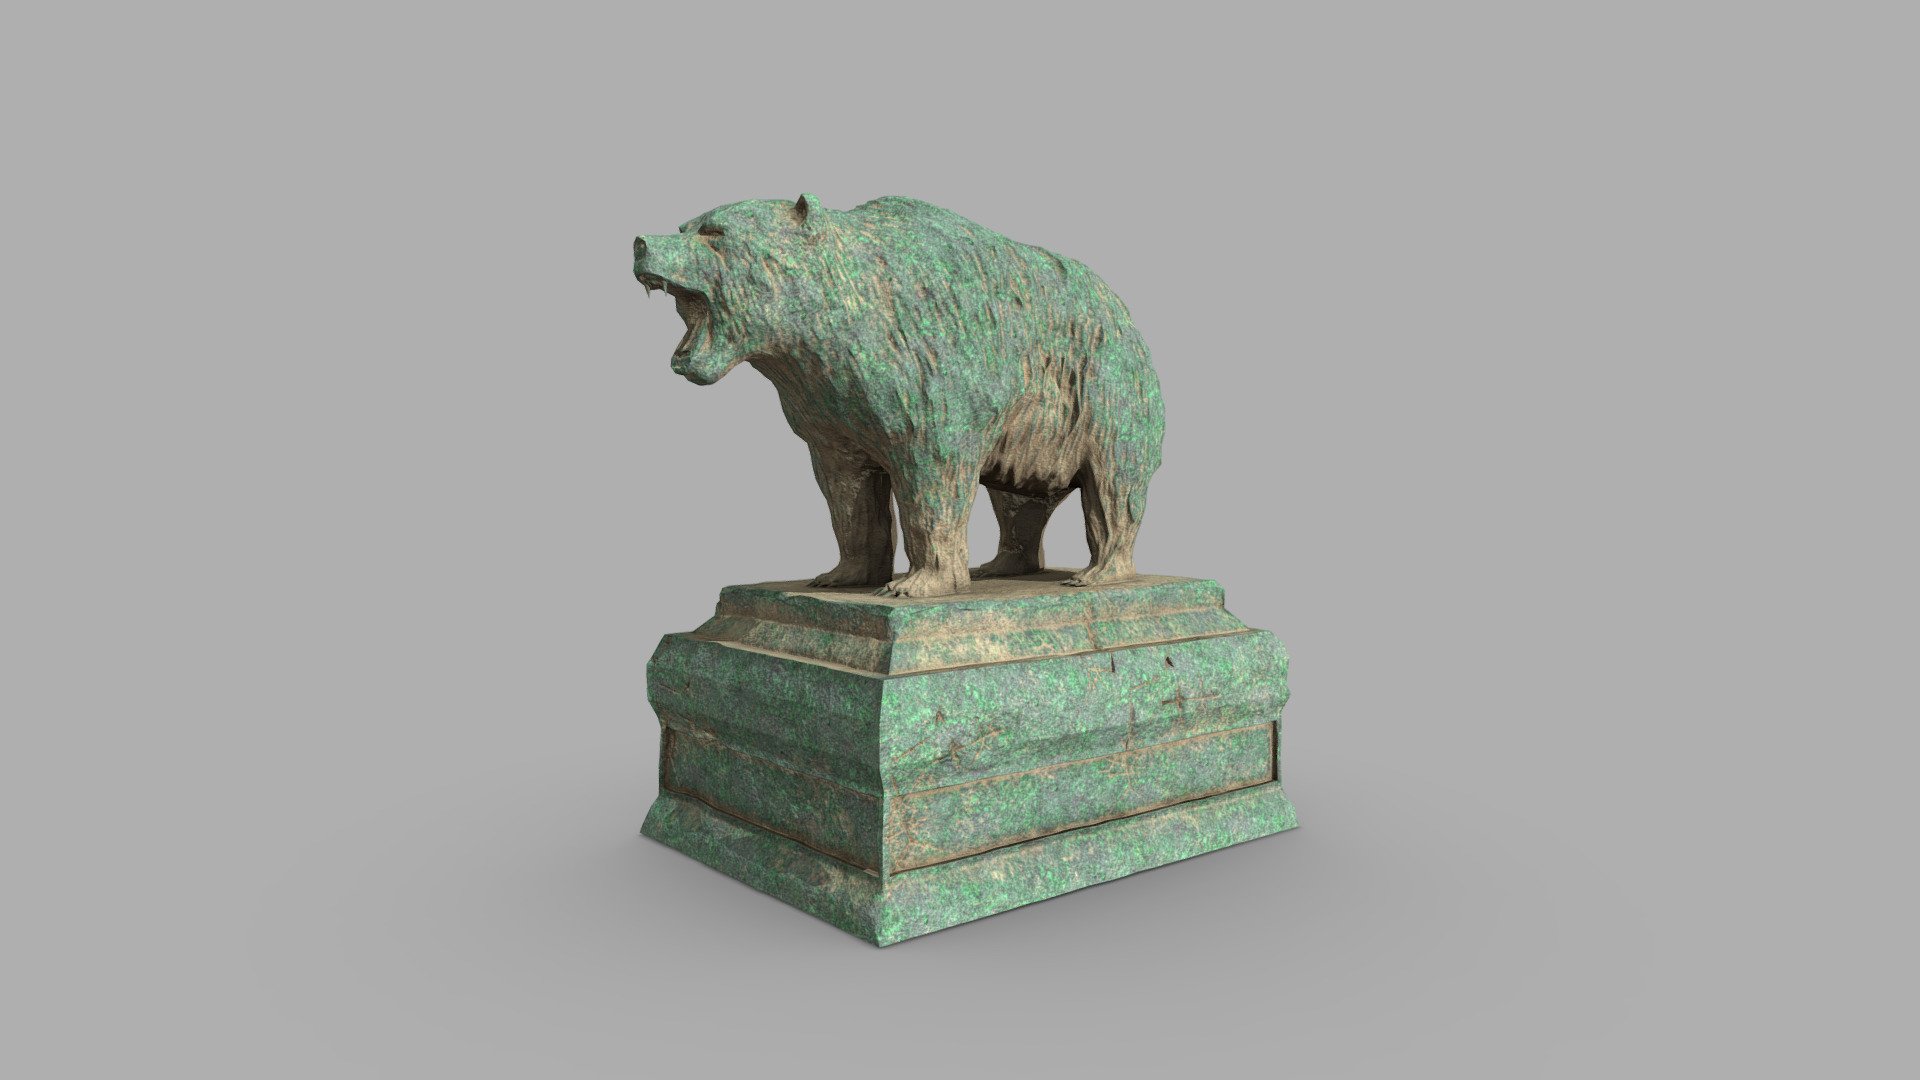 Bear Statue Low Poly

Topology: Tris

Polygon count: 15019

Vertices count: 7500

Textures: Diffuse, Normal, Specular, Glossiness, Curvature, Height, Ambient Occlusion ( all in 4k resolution)

UV mapped with non-overlapping

All files are zipped in one folder. Contains 3 file formats obj, blend &amp; fbx

Useful for games, renders and other graphical projects 3d model